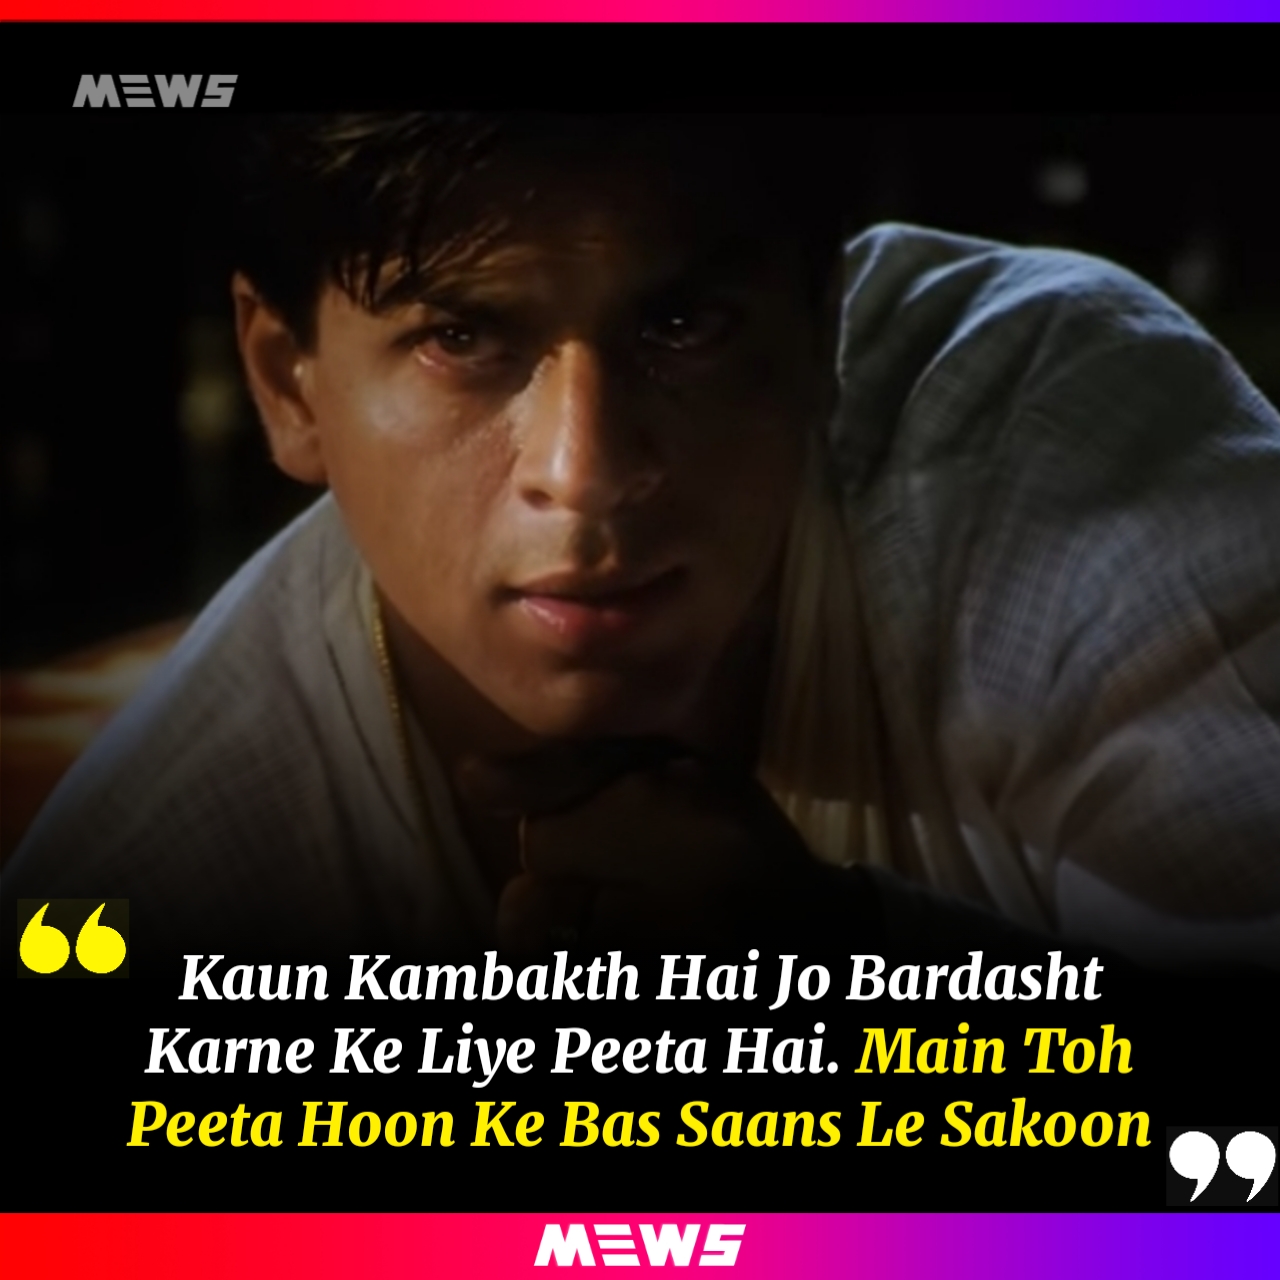 famous Bollywood movie dialogues